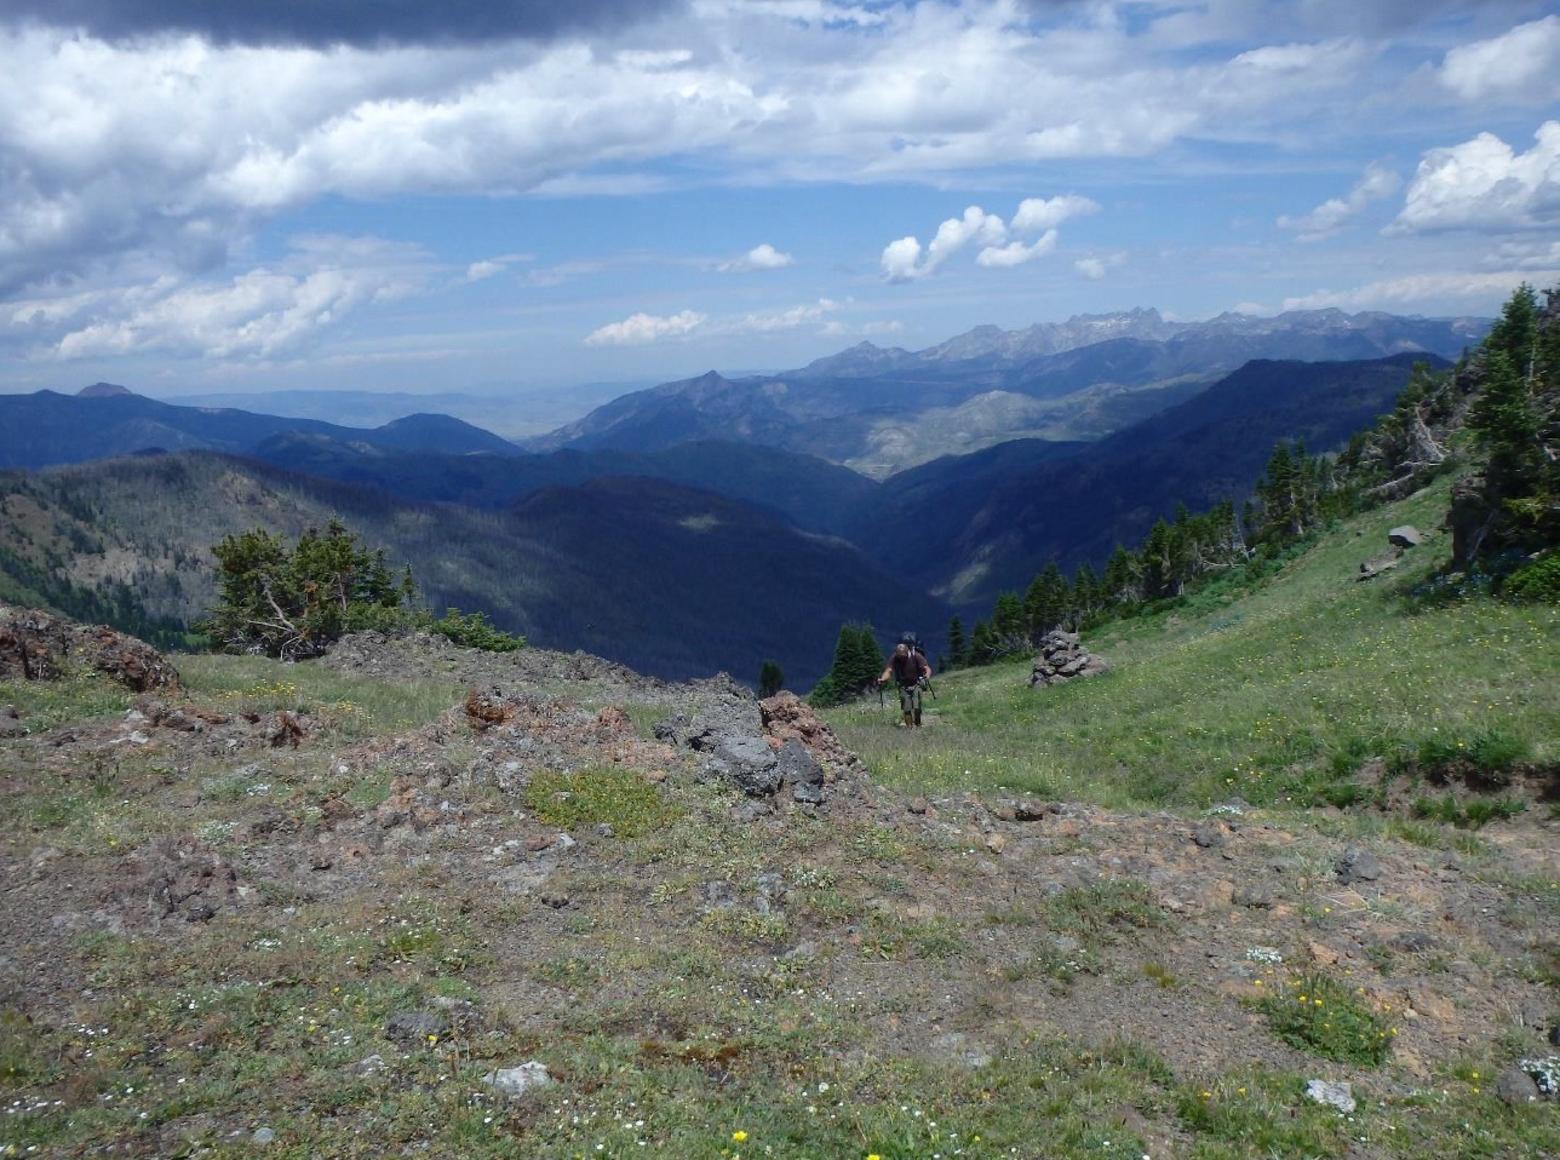 Solitude and wildlife still persist undisturbed in the Absaroka-Beartooth Wilderness though the Forest Service has allowed various waves of industrial strength uses to impact other areas of the backcountry. Photo courtesy Jesse Logan